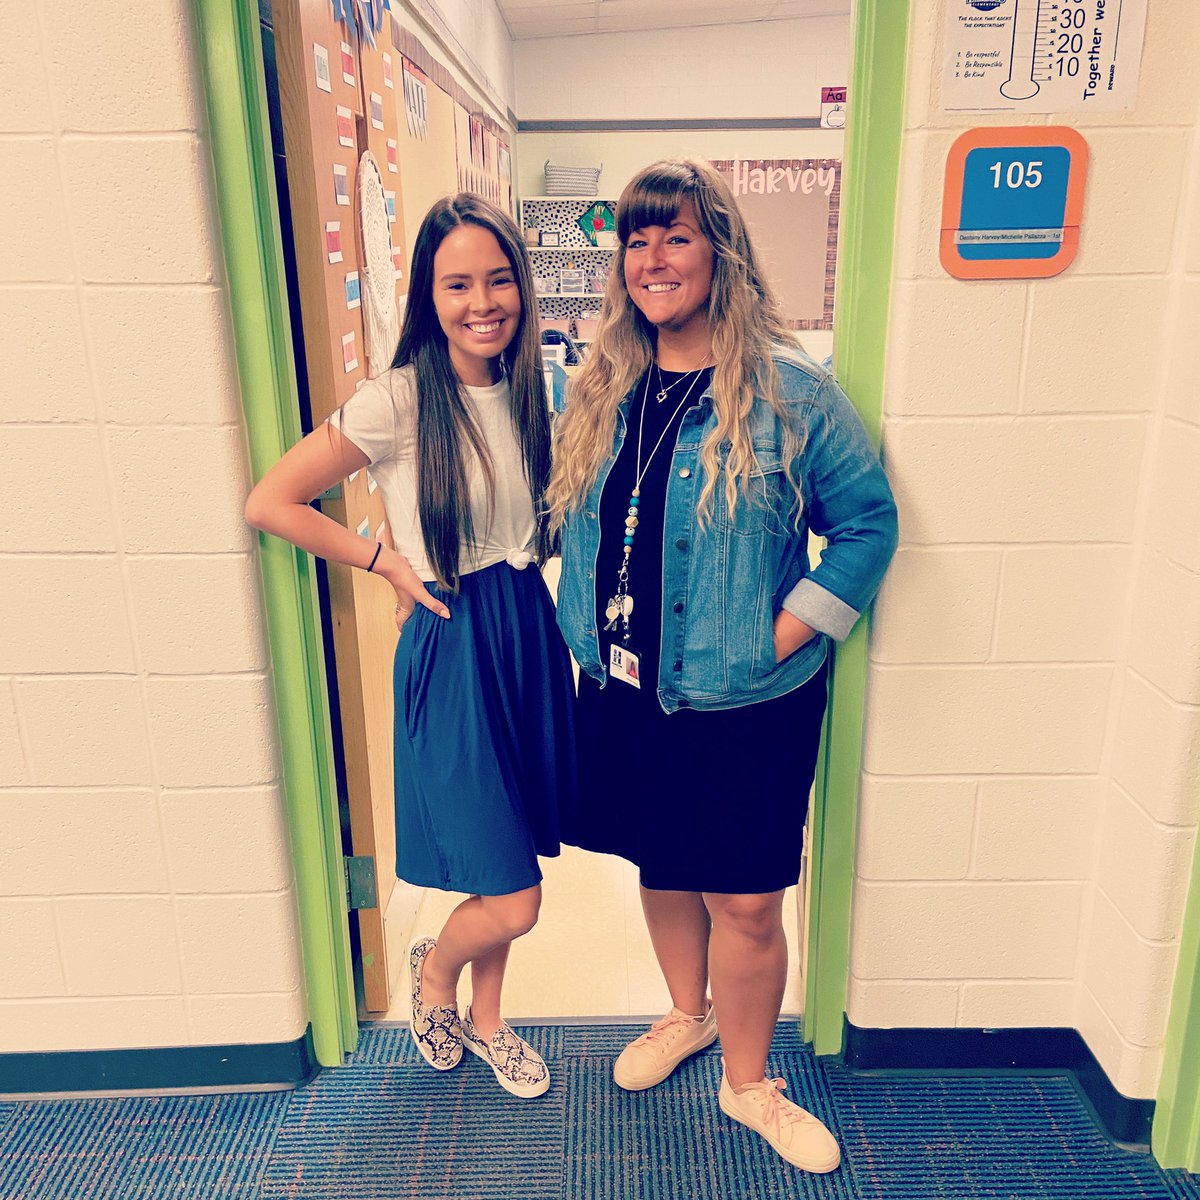 First day of first grade! We took this picture of us before school, fully planning on doing an “after” and looking disheveled. I usually do. But having two teachers AND staggered start made the first day a breeze! #believebeintentional